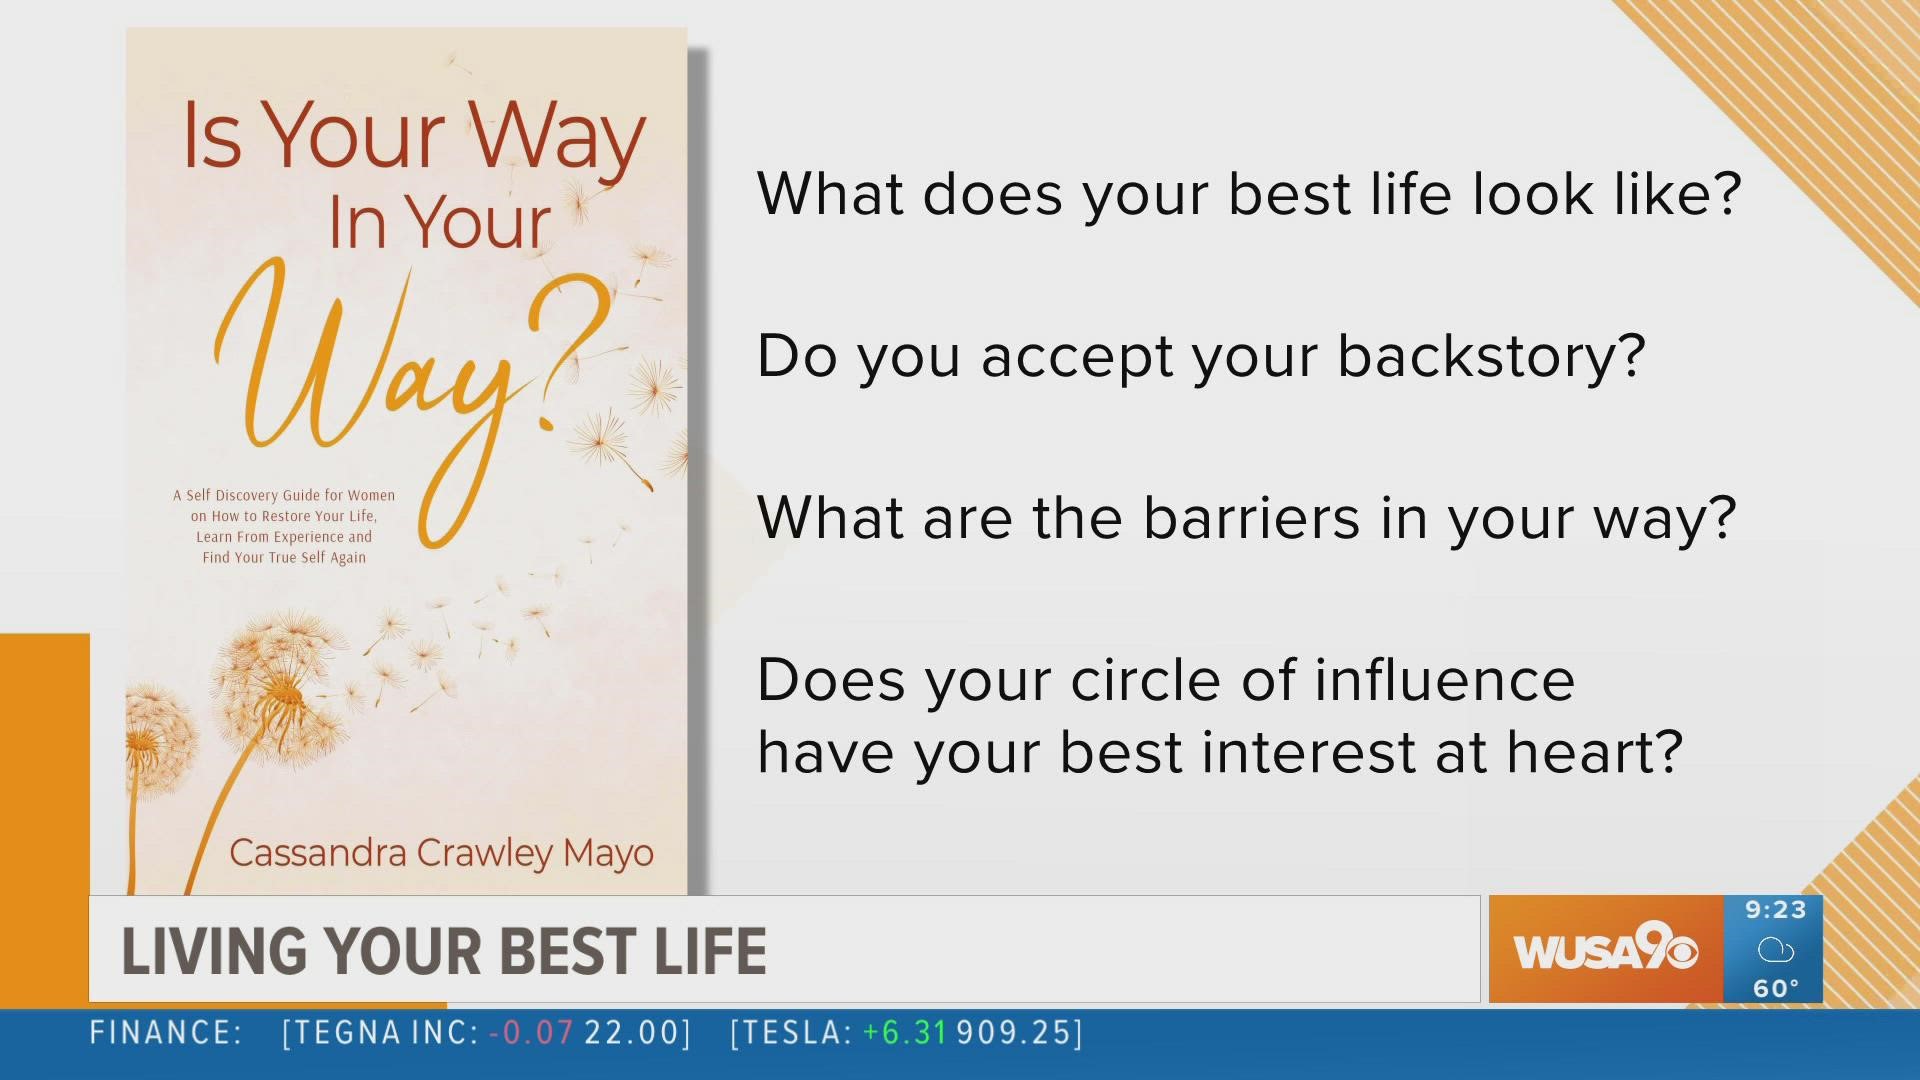 Author, speaker and mentor Cassandra Crawley Mayo explains how you can get our of your own way to aspire greater personal wellness.